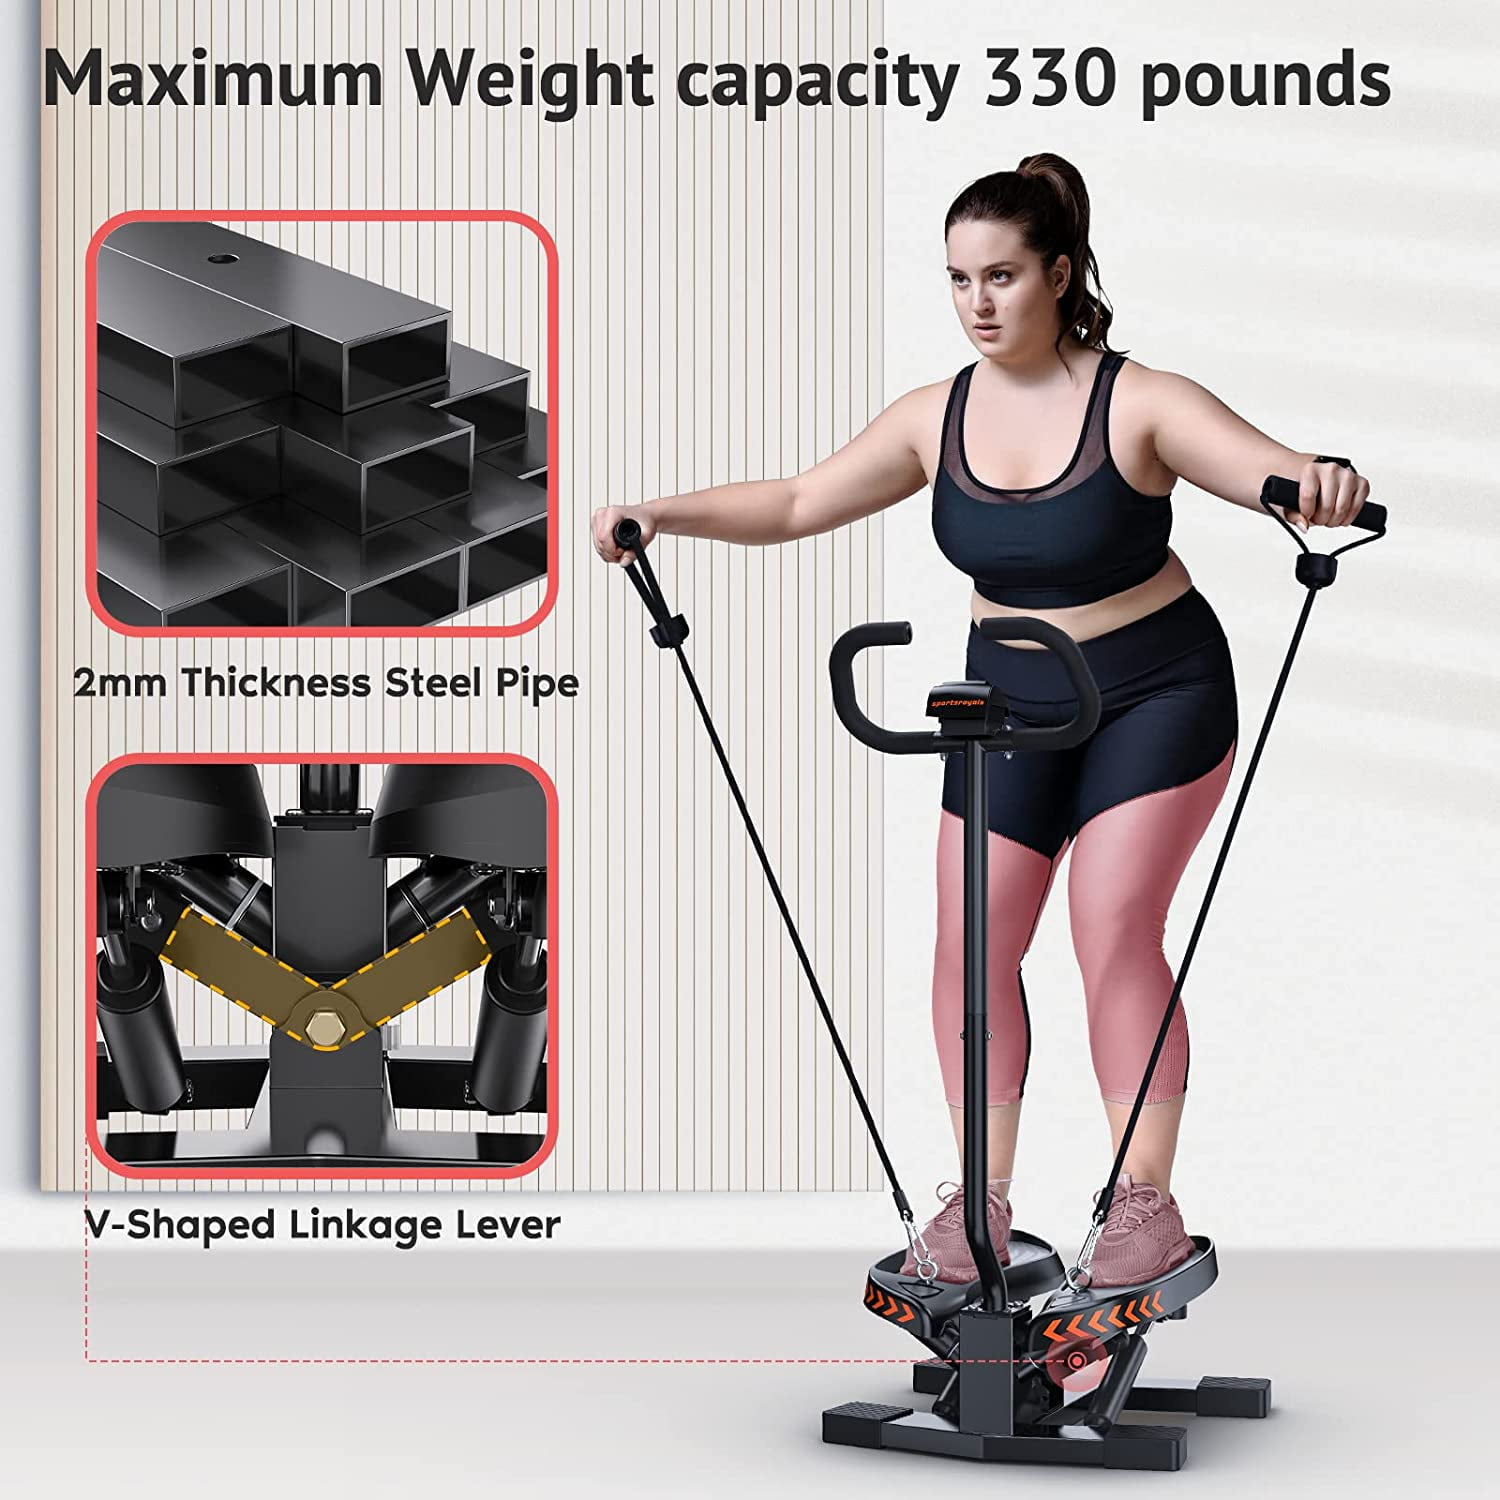  RIEJIN Stair Stepper for Exercise, Mini Steppers with  Resistance Band, Hydraulic Fitness Stepper Exercise, 330lbs Weight Capacity  : Sports & Outdoors